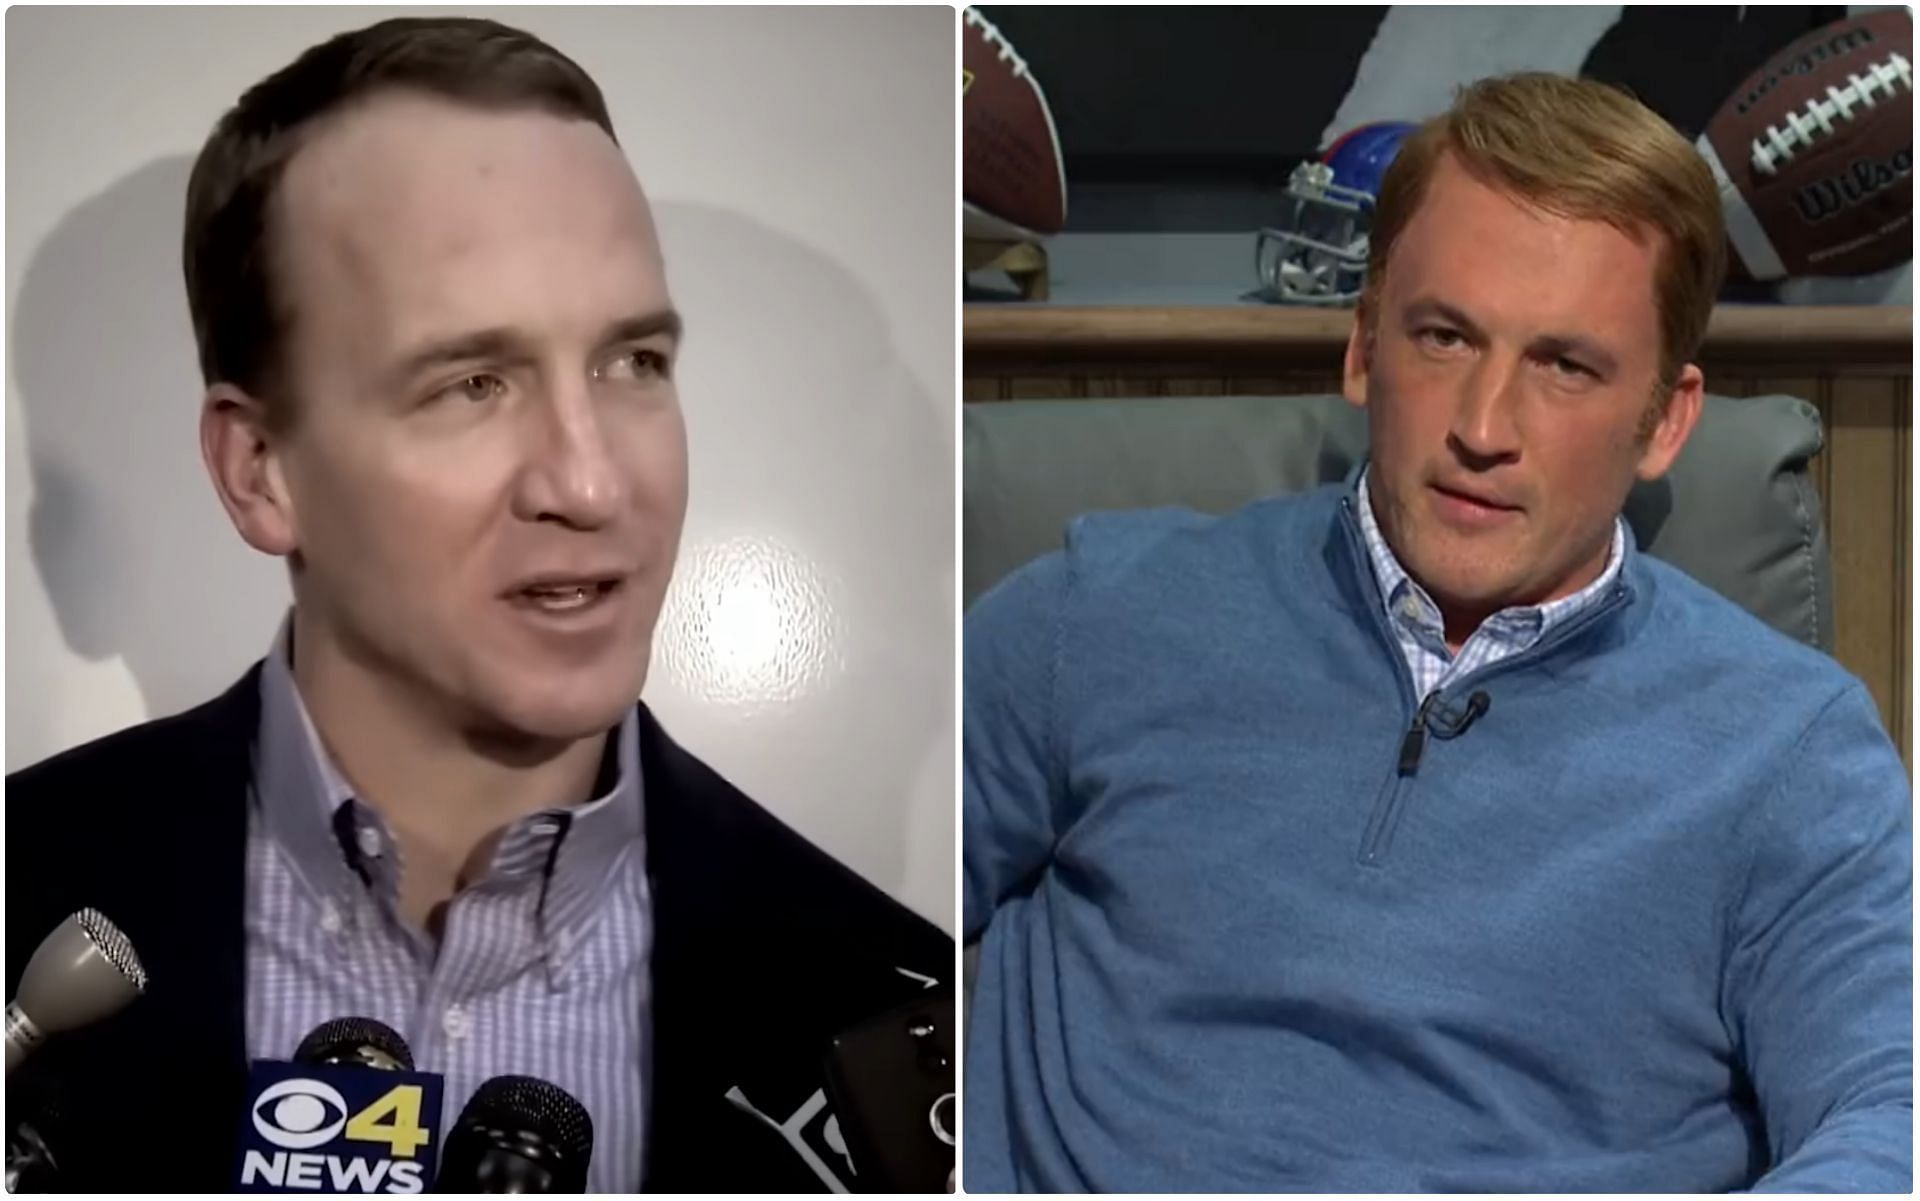 Miles Teller (on the right) pulled off a spot-on imitation of Peyton Manning on SNL cold open (Images via NFL and NBC)